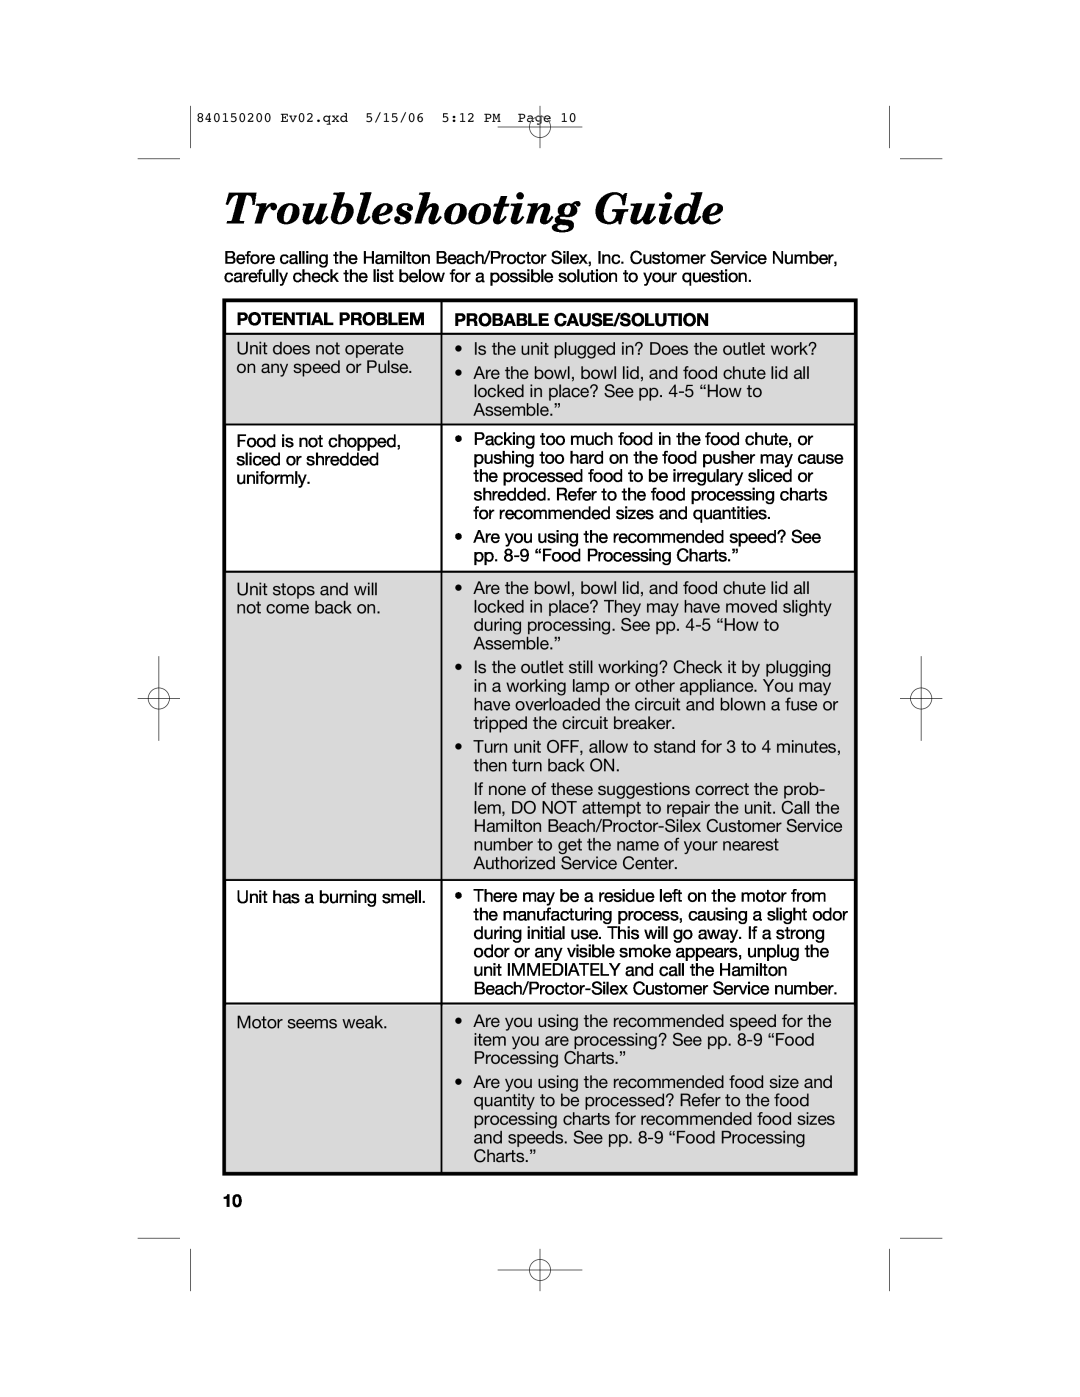 Proctor-Silex 840150200 manual Troubleshooting Guide, Potential Problem, Probable Cause/Solution 